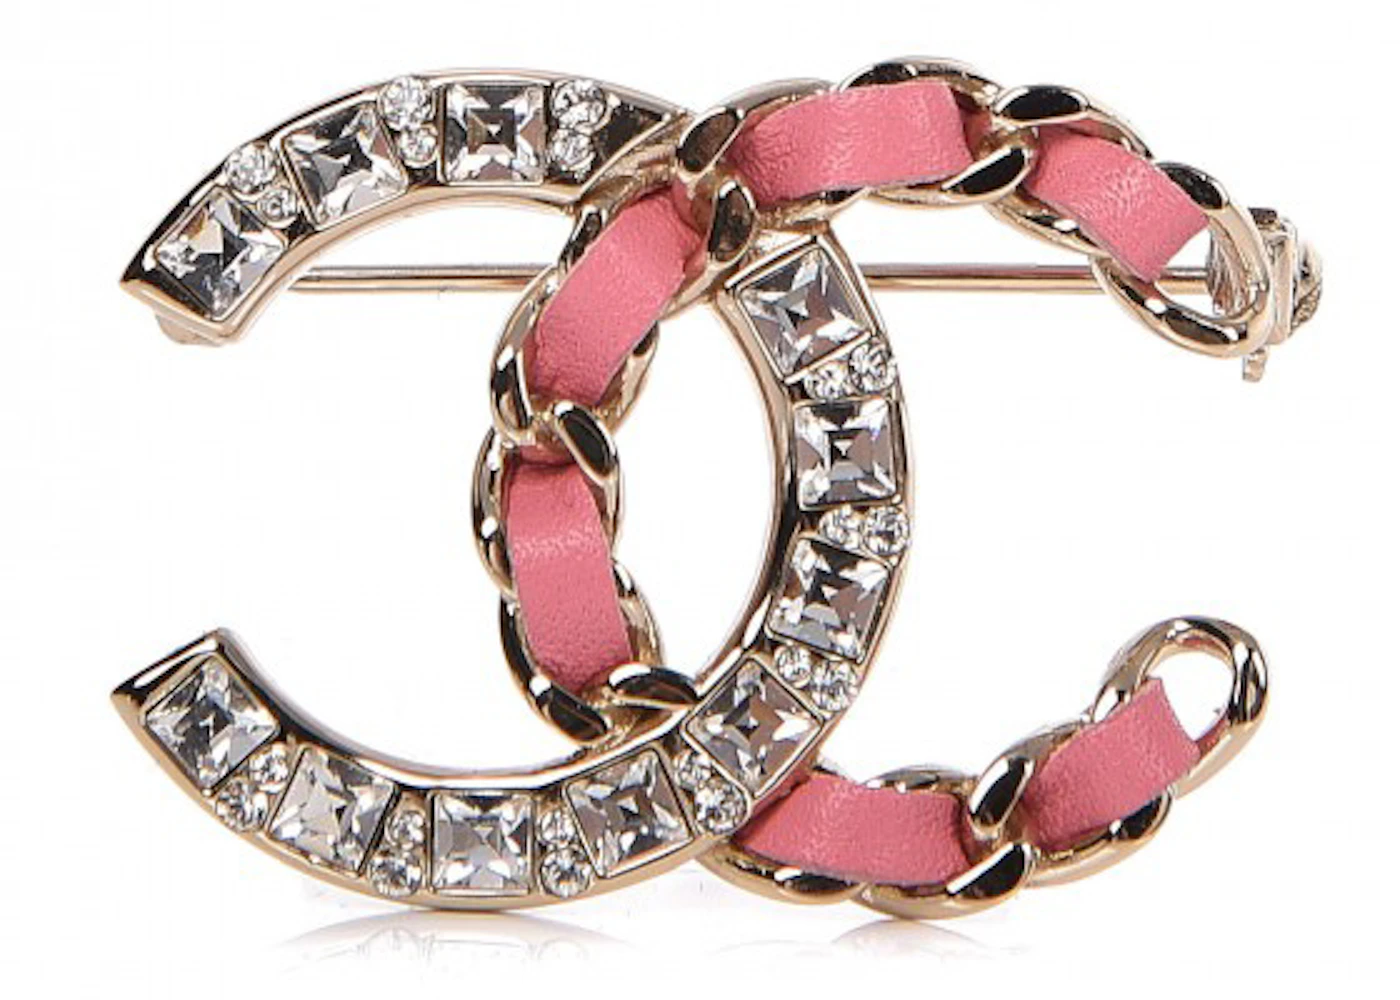 Cc pin & brooche Chanel Pink in Metal - 35619712